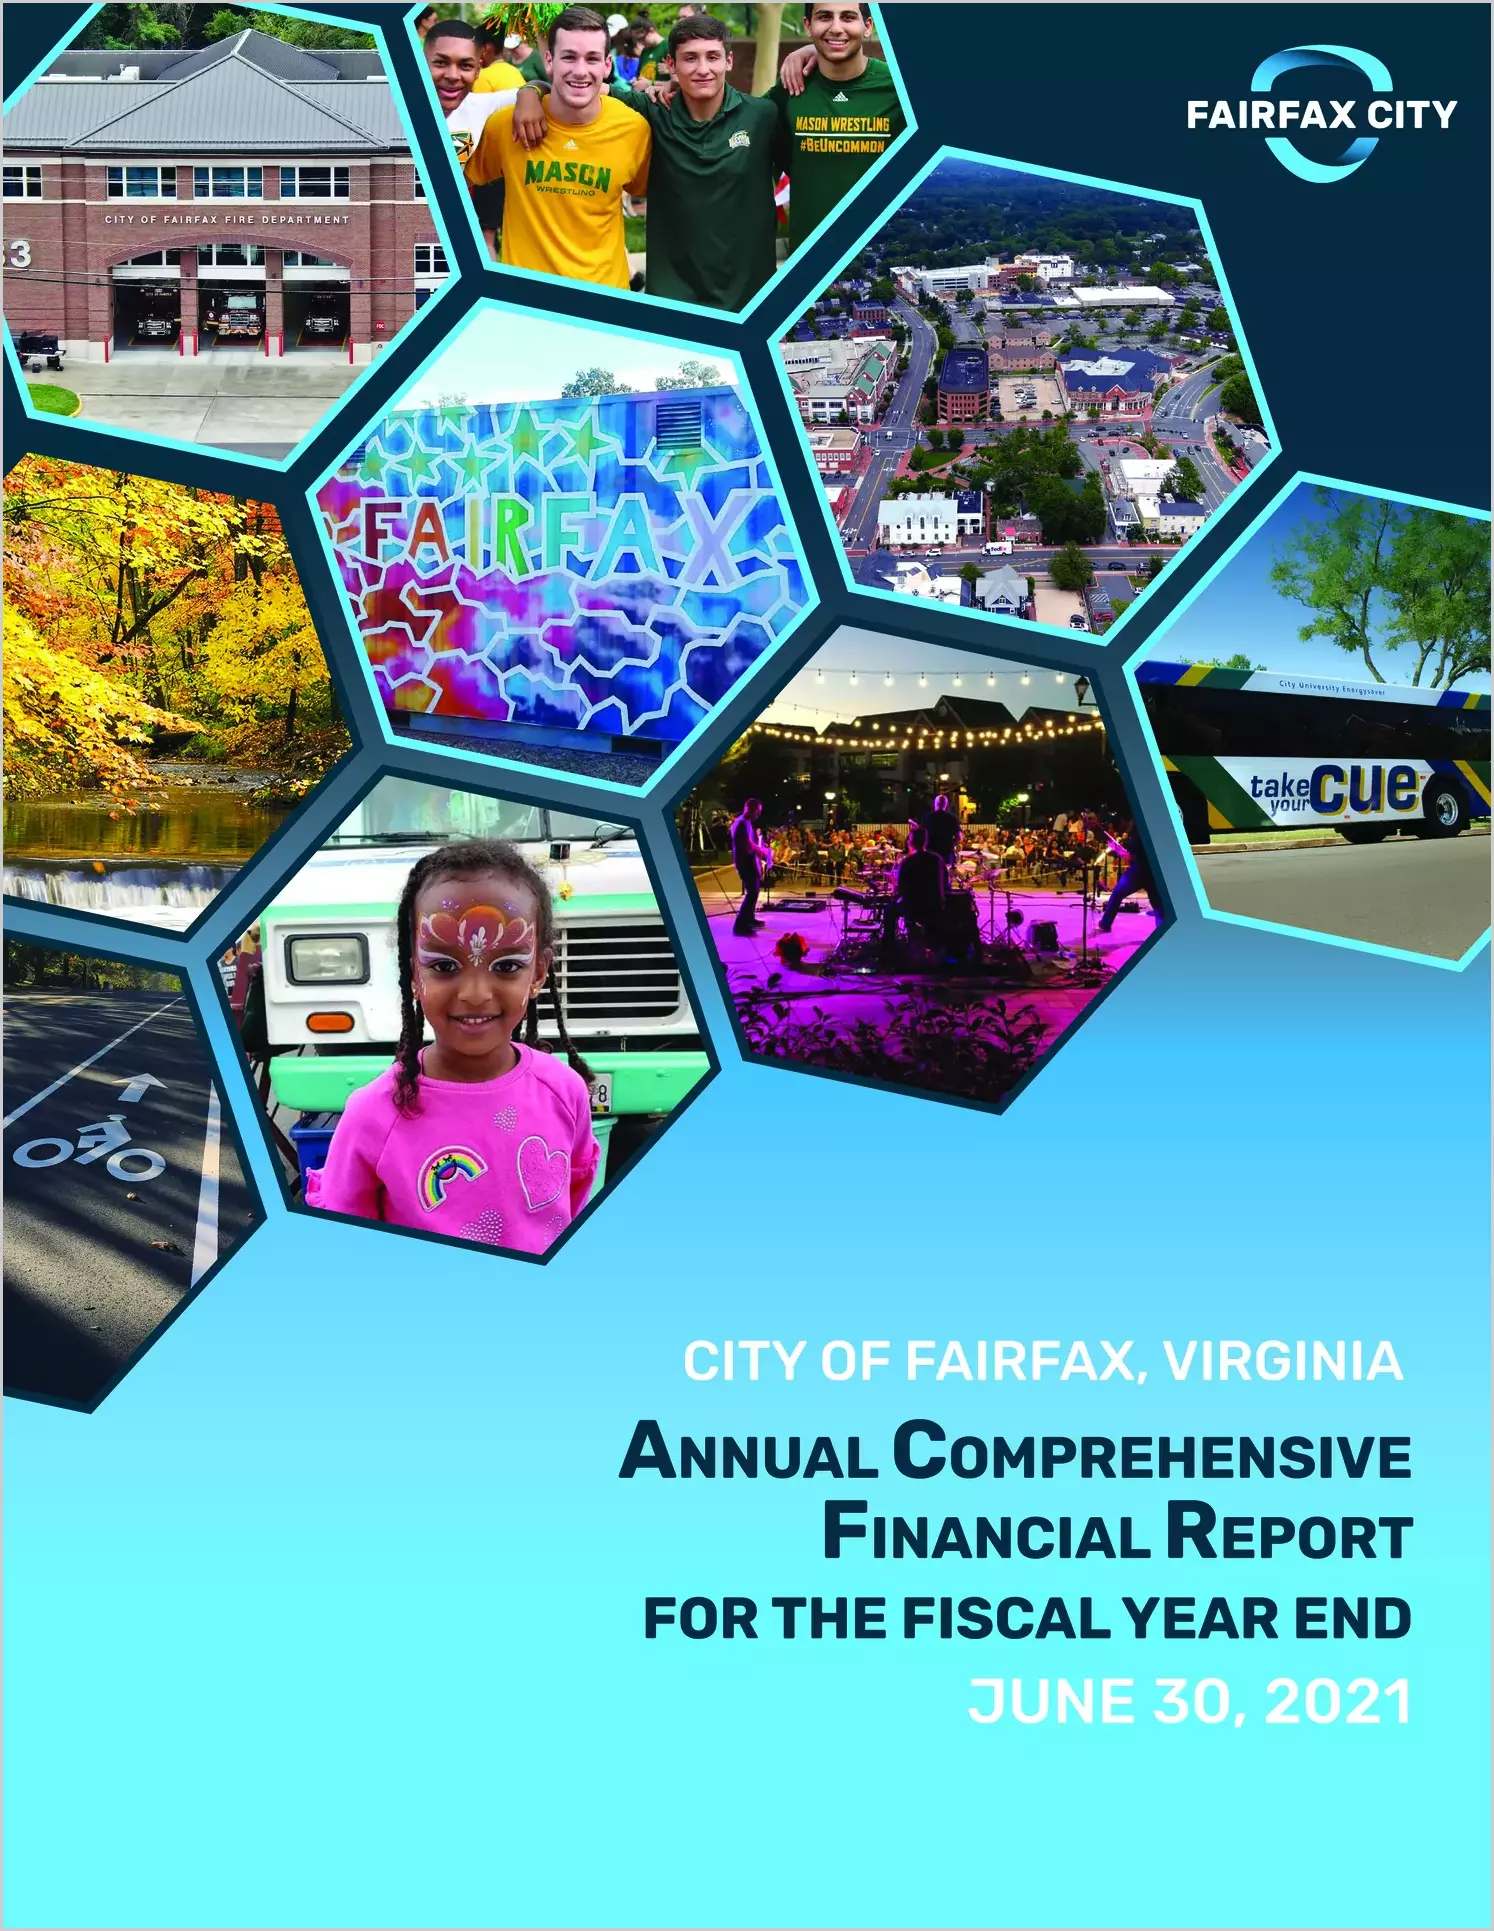 2021 Annual Financial Report for City of Fairfax